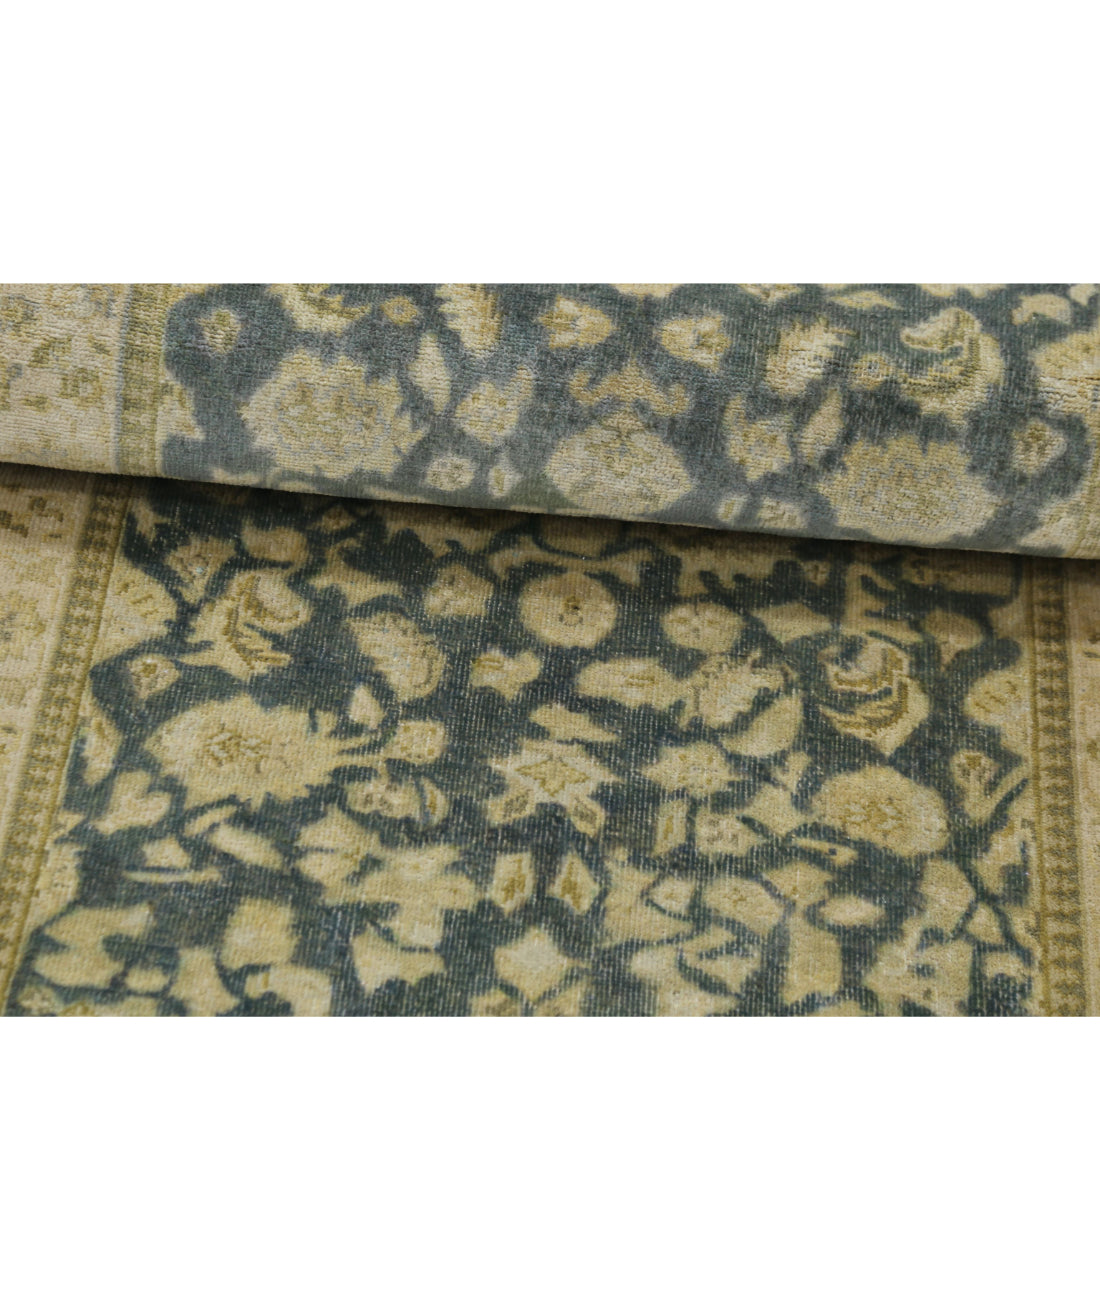 Ziegler 2'7'' X 9'7'' Hand-Knotted Wool Rug 2'7'' x 9'7'' (78 X 288) / Blue / Ivory